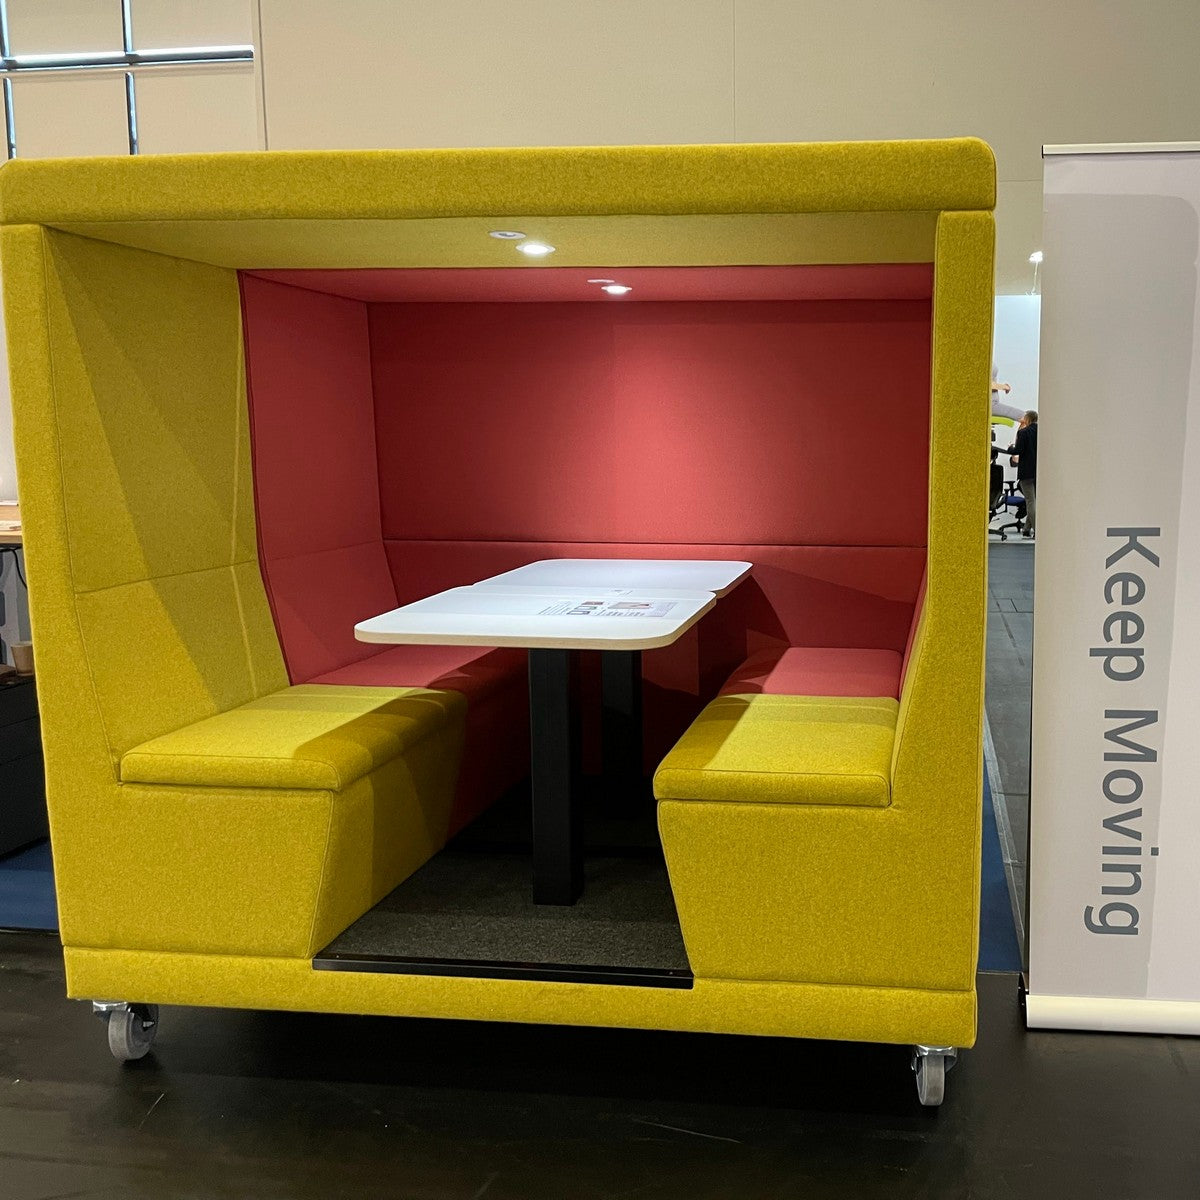 Mobility is key - even for booths